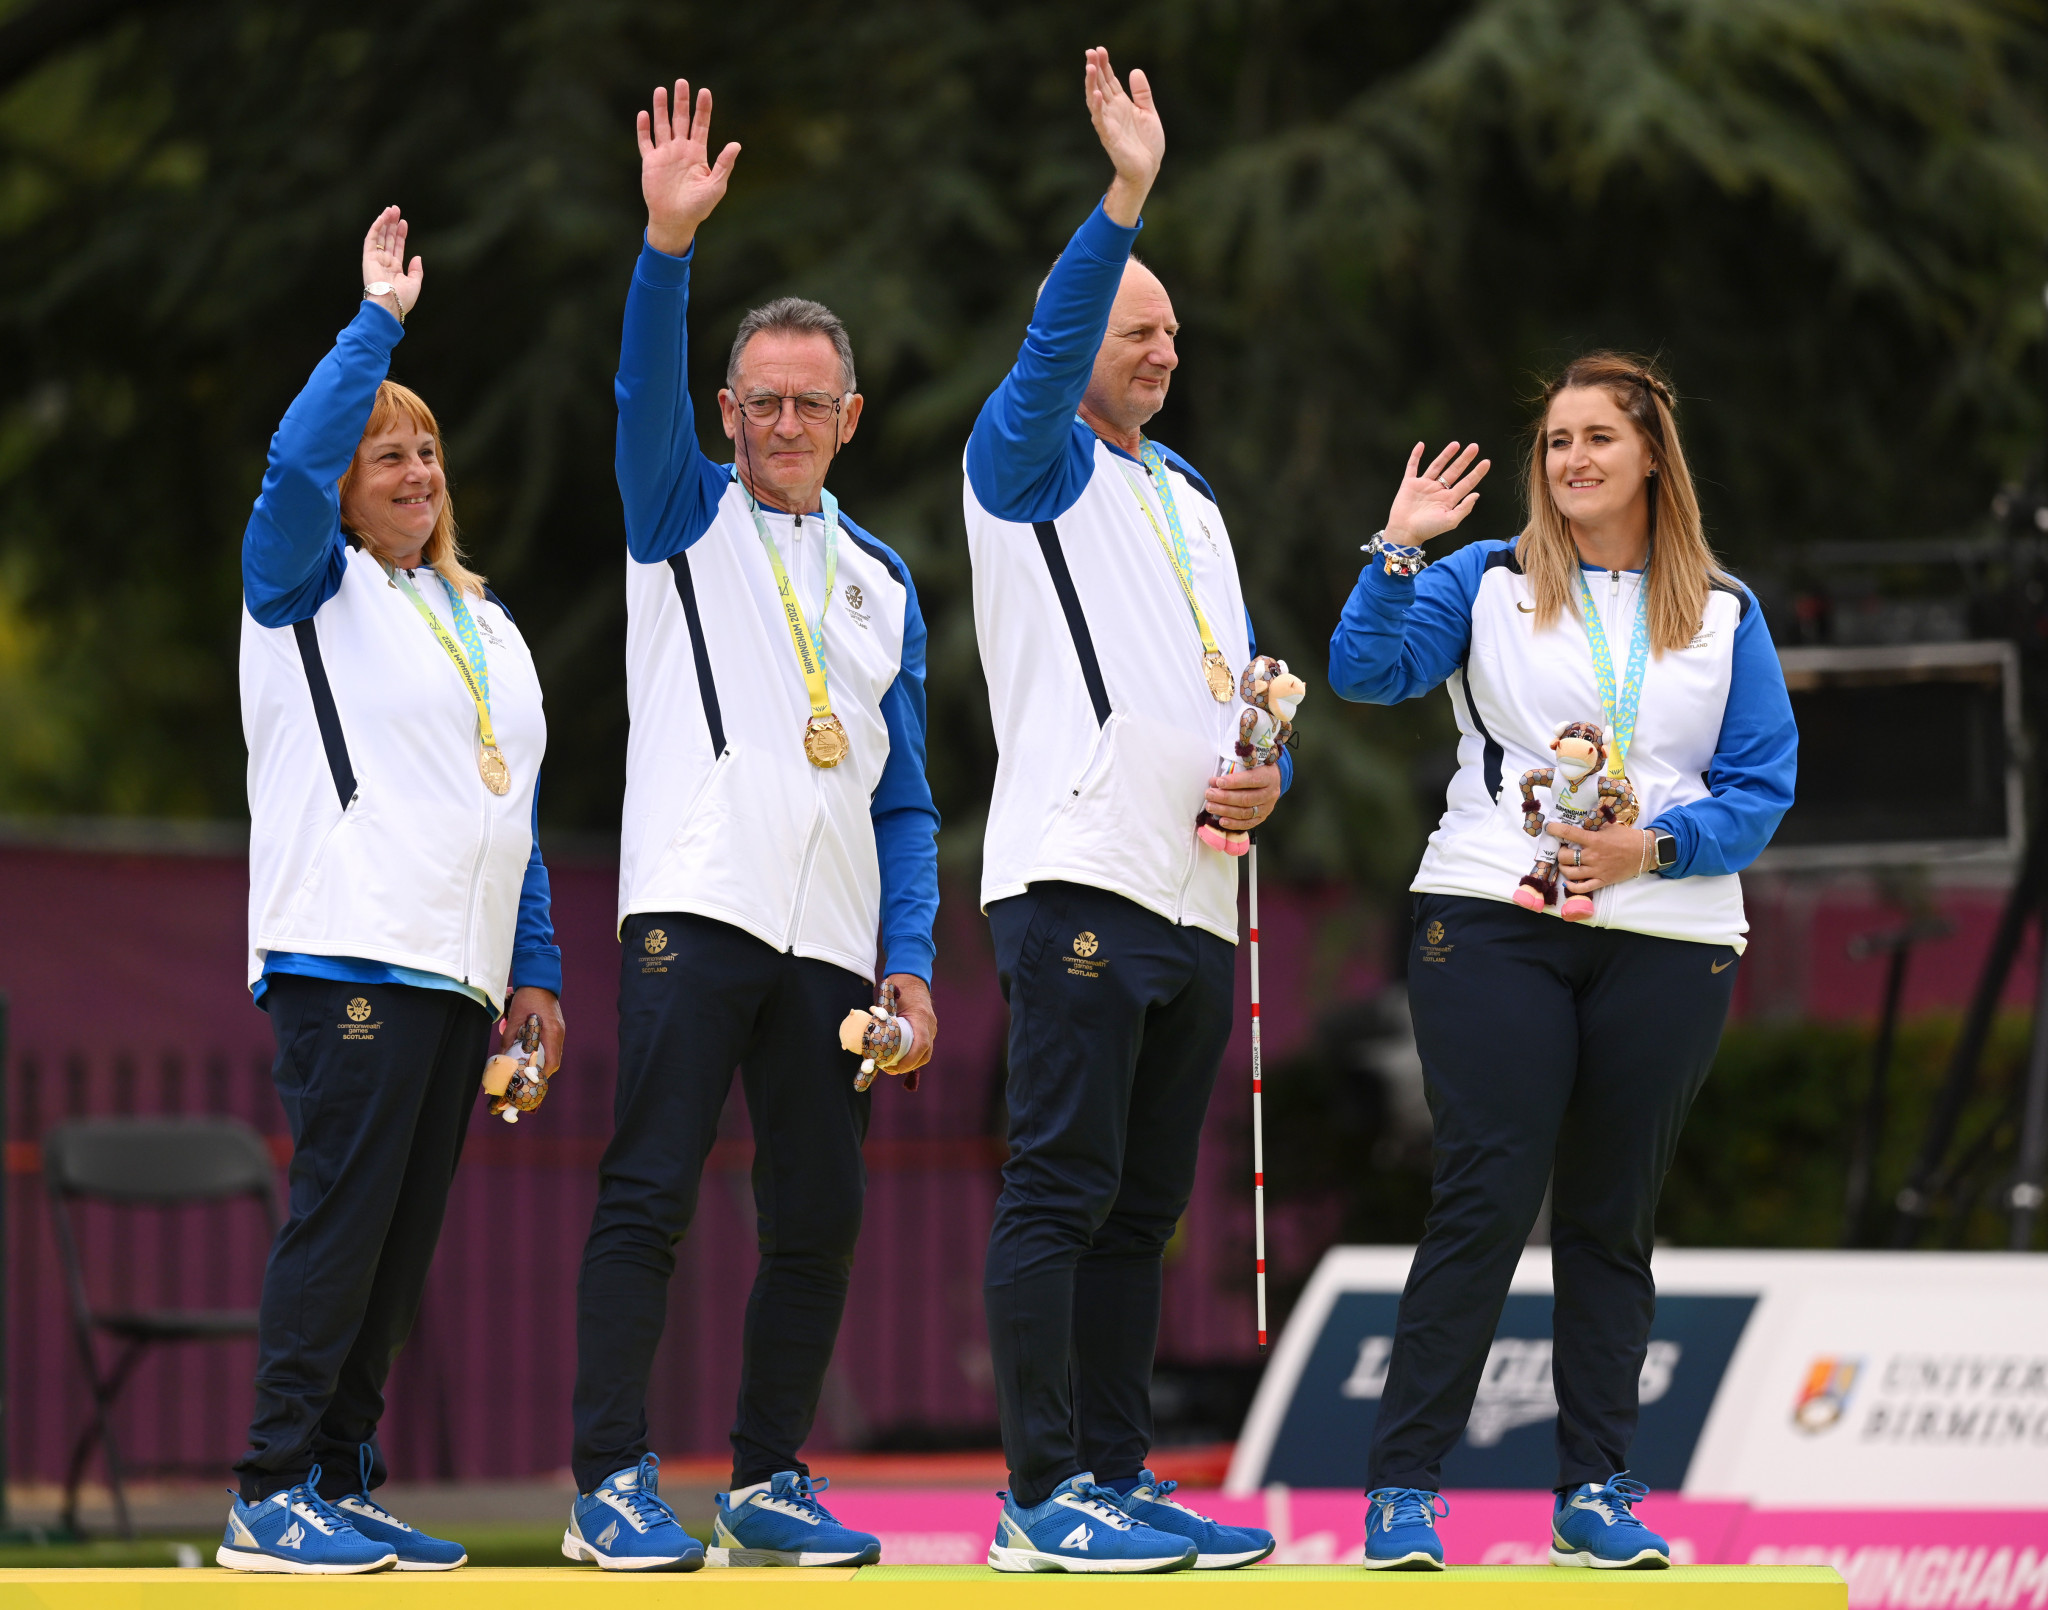 Scotland claimed a gold medal in Para lawn bowls in Leamington Spa, continuing the nation's good form on the green ©Getty Images